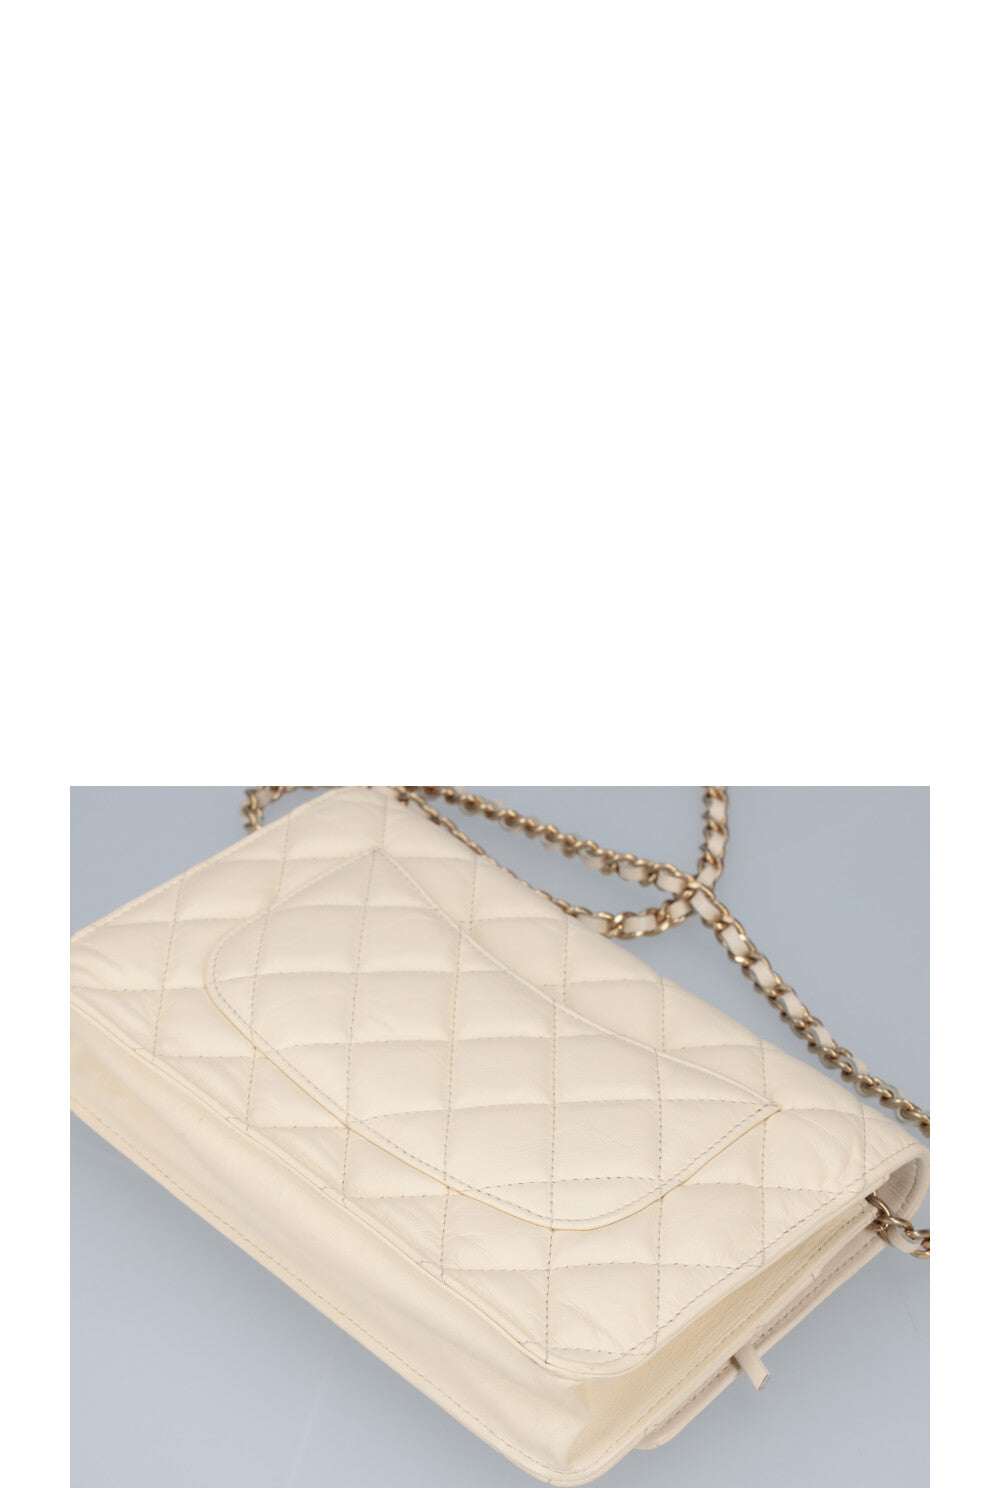 CHANEL 2.55 Wallet on Chain Bag  Ivory